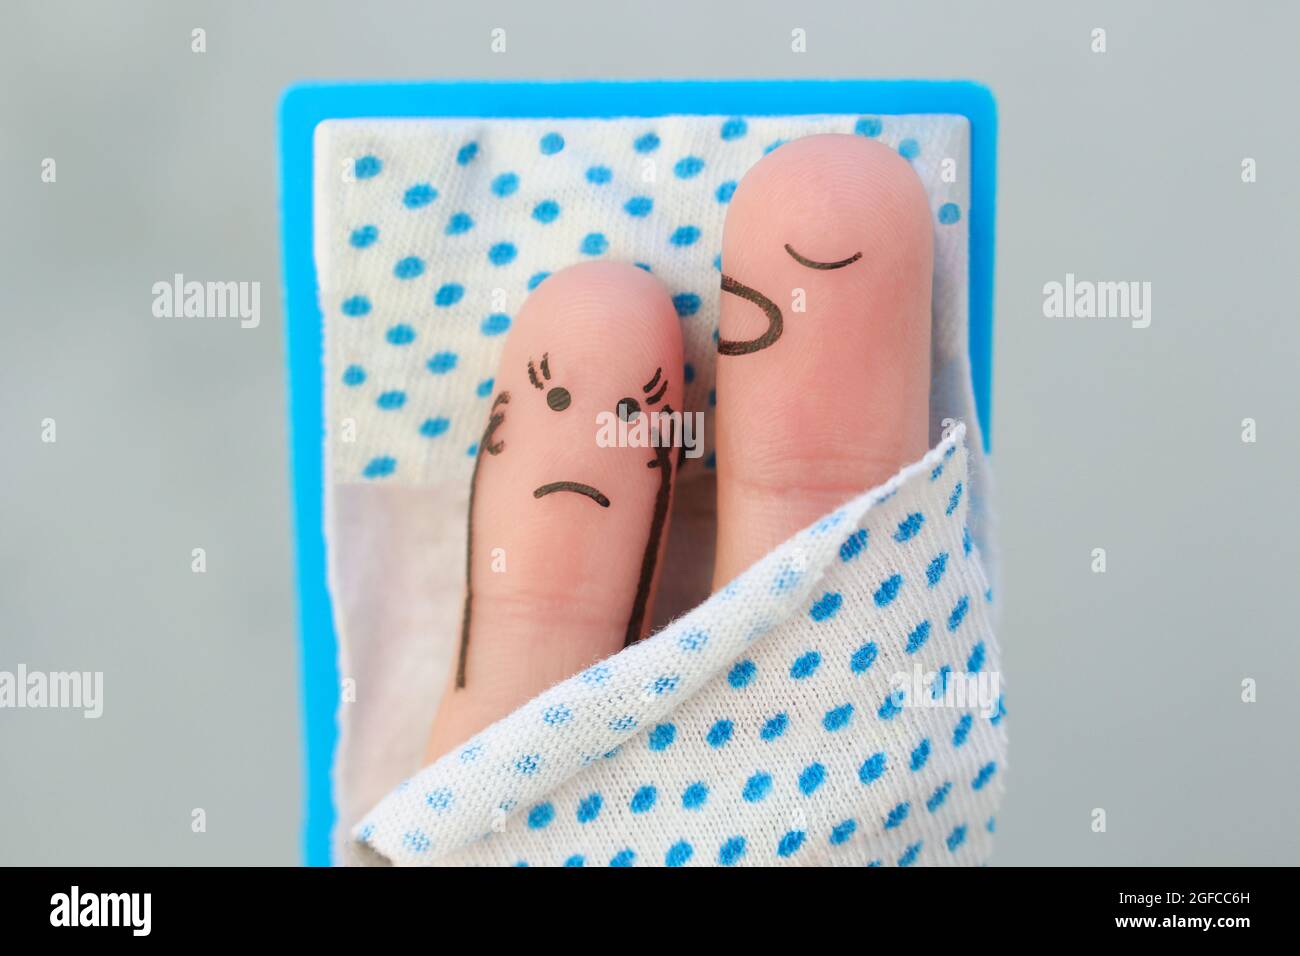 Fingers art of couple in bedroom pic pic